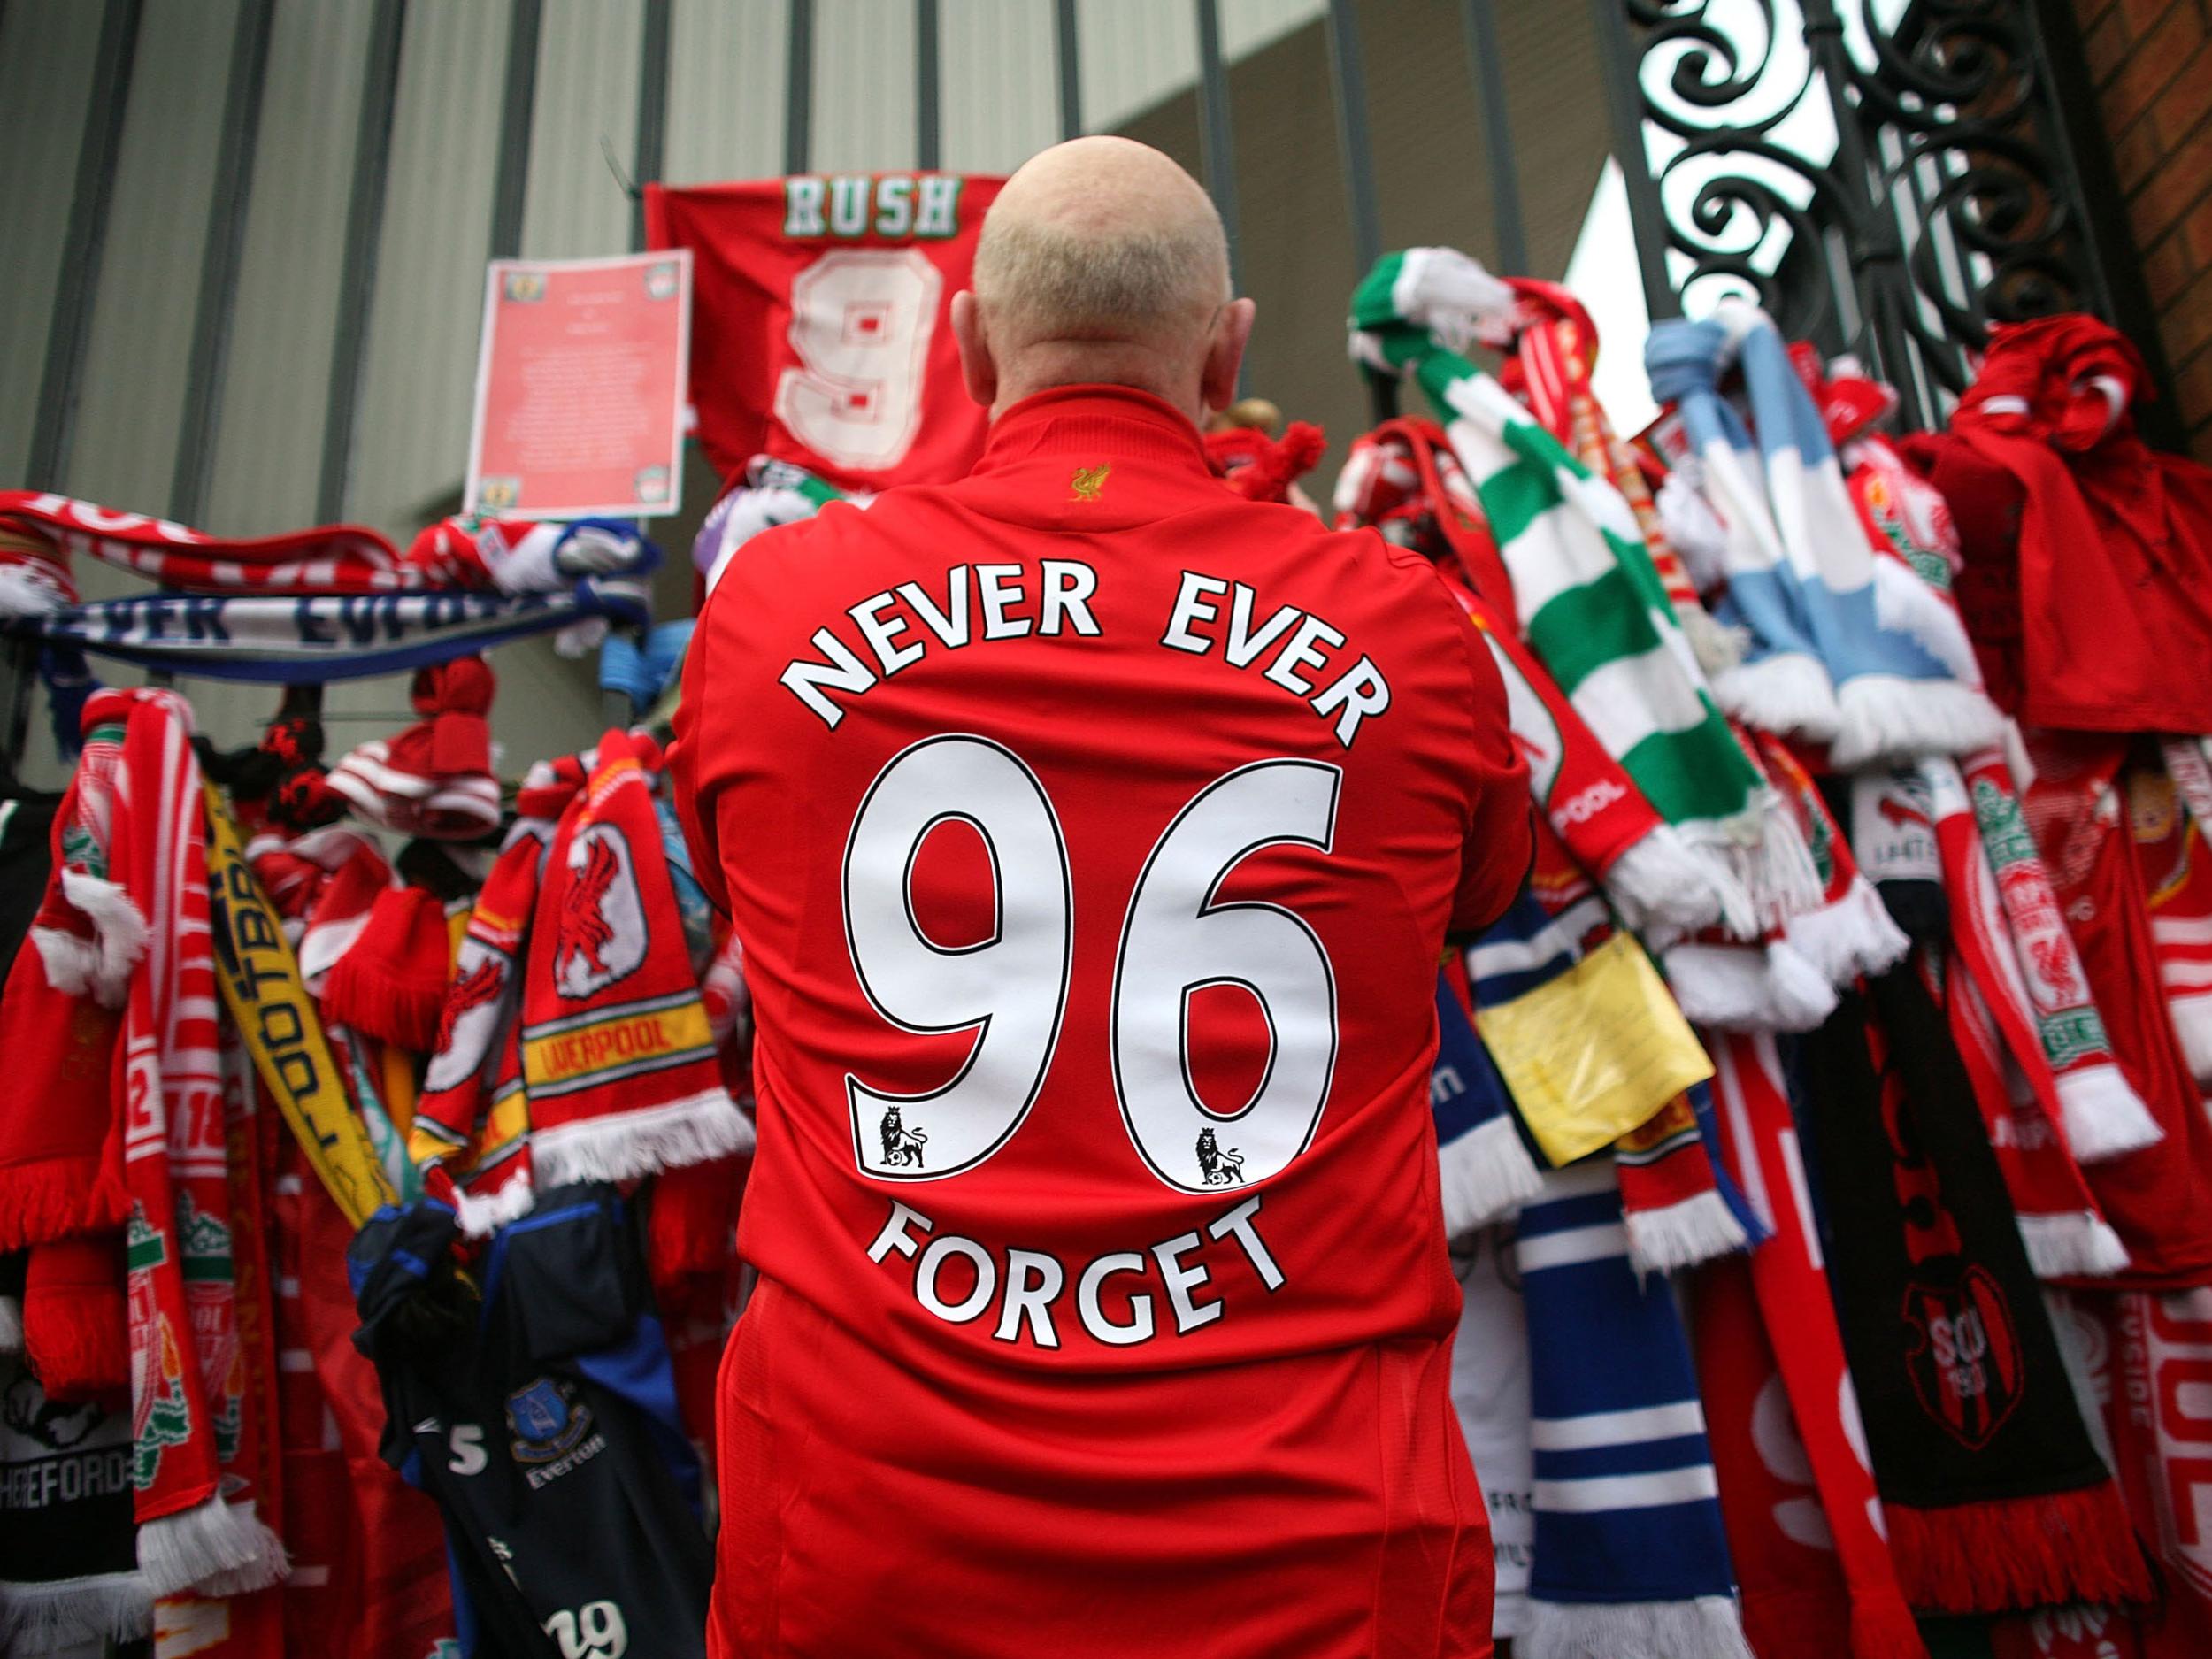 A jury judged last year that the 96 victims of the disaster were unlawfully killed